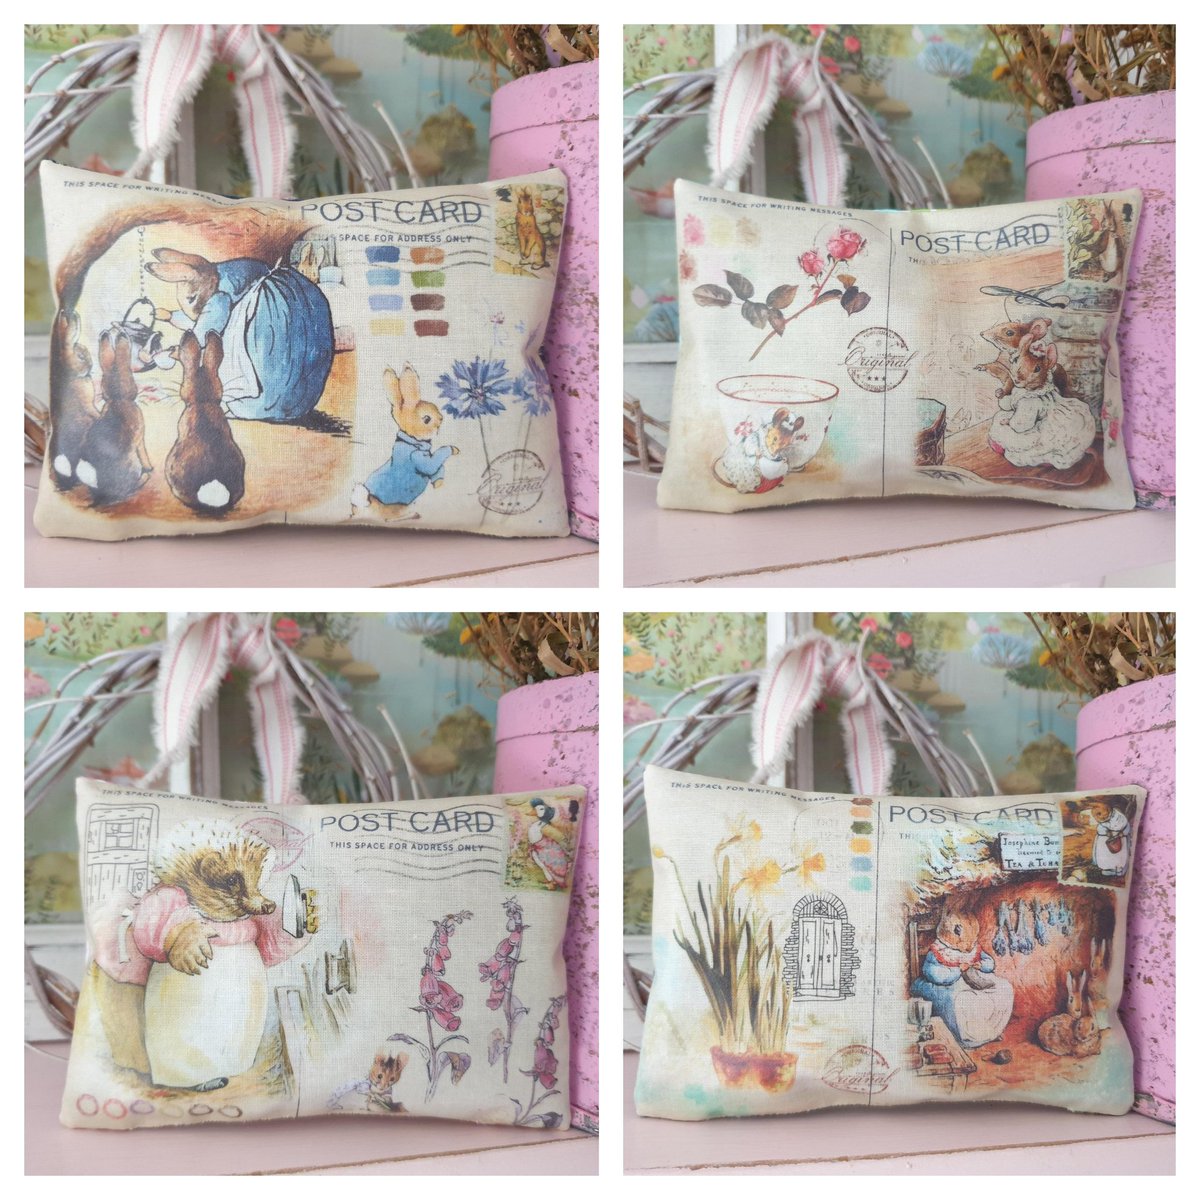 I've just added these fabulous Beatrix Potter postcard illustrations pillows to my Etsy shop. There are 4 designs and each come scented with lavender or rose petals #elevenseshour sarahbenning.etsy.com/listing/172138…